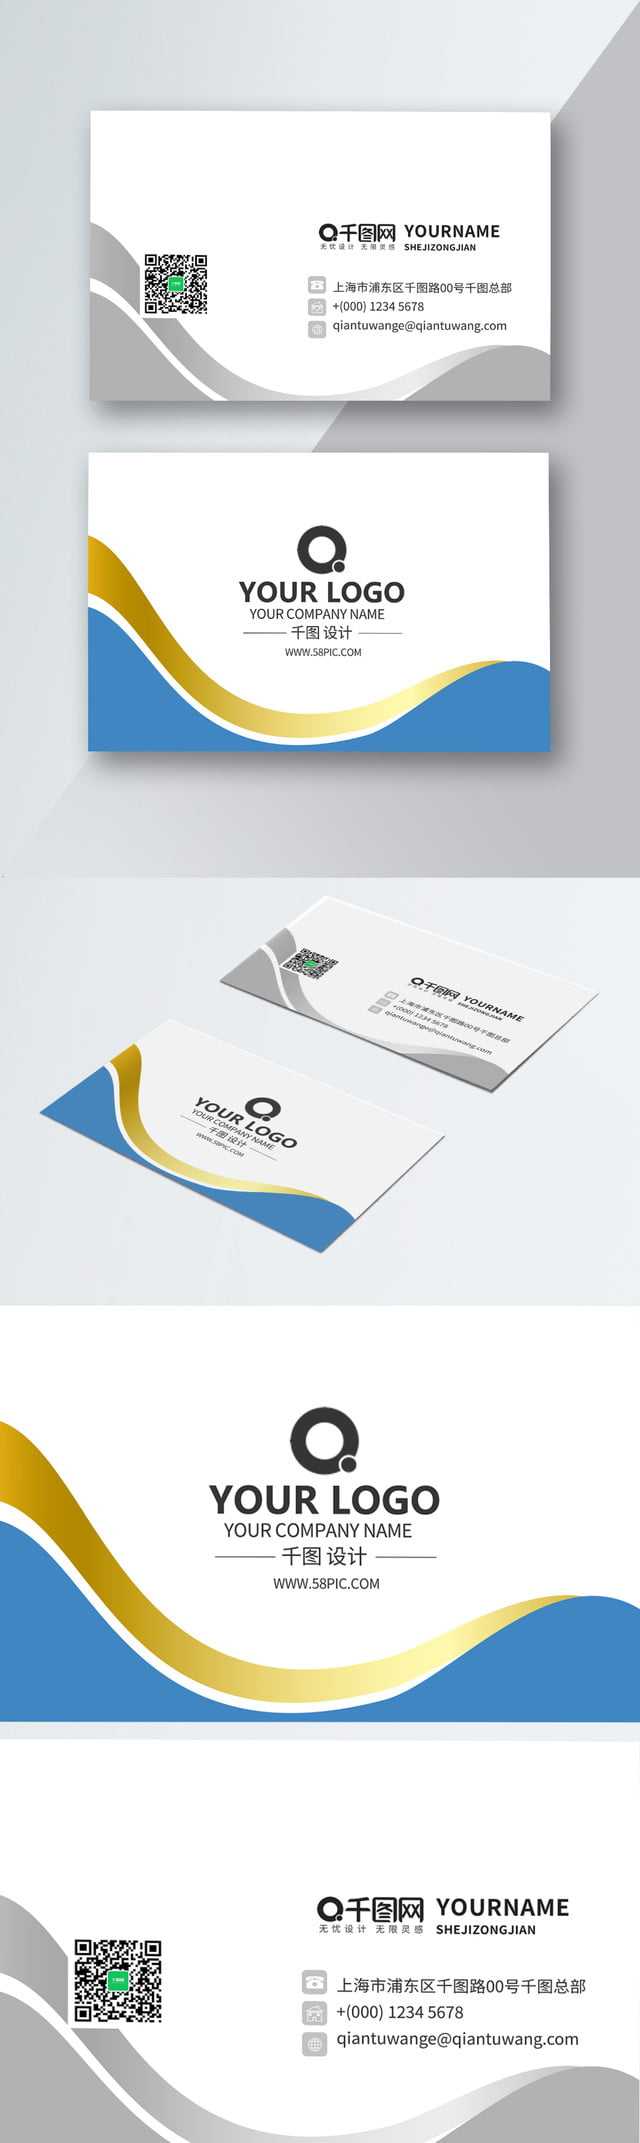 Excavator Business Card Vector Material Excavator Business In Visiting Card Templates Download